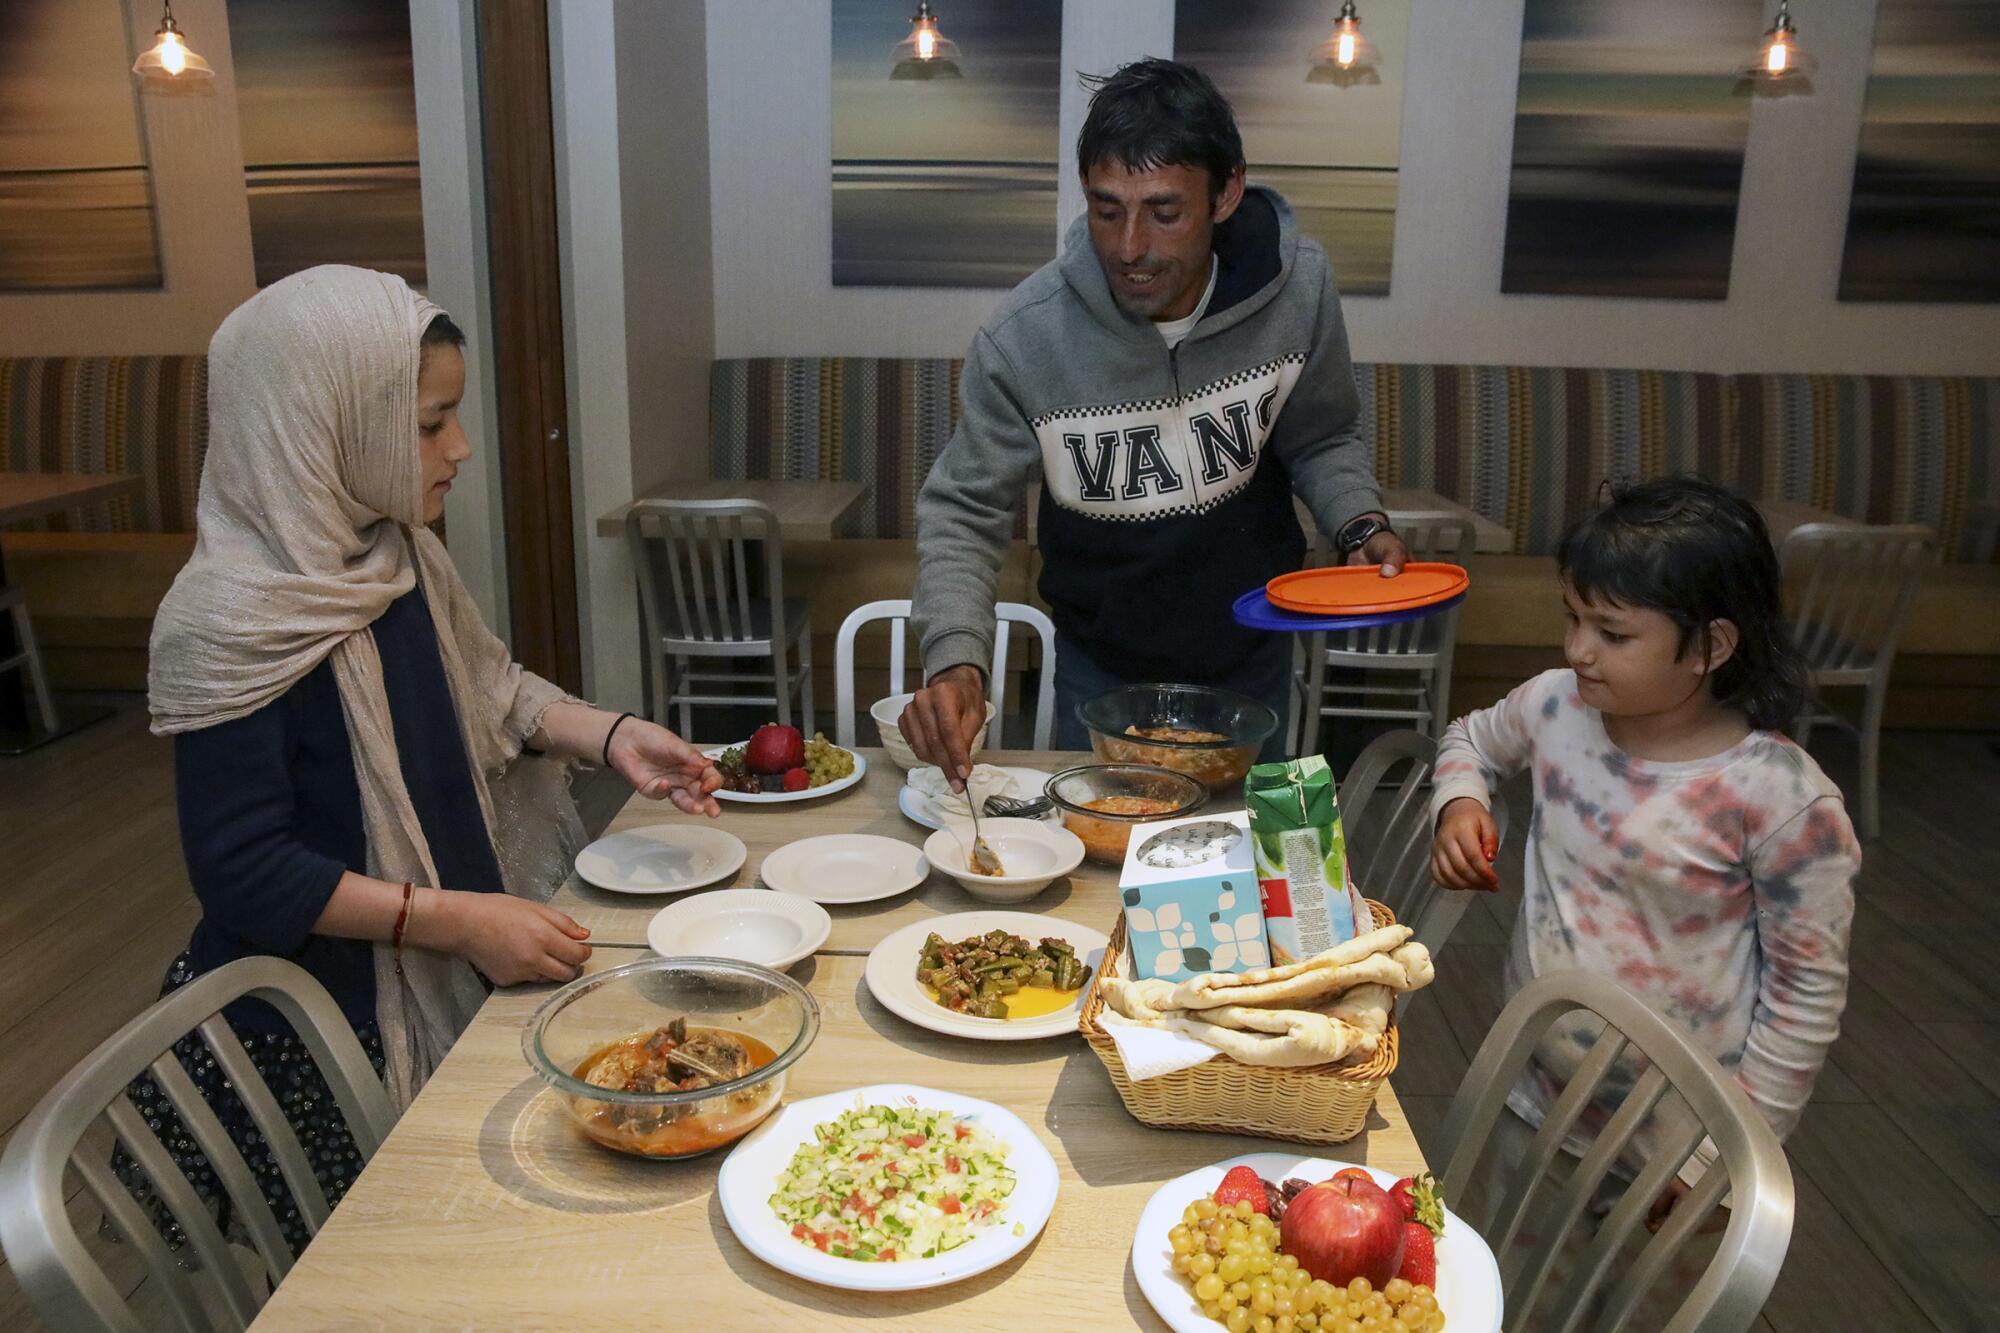 A man and two child get food at a table.